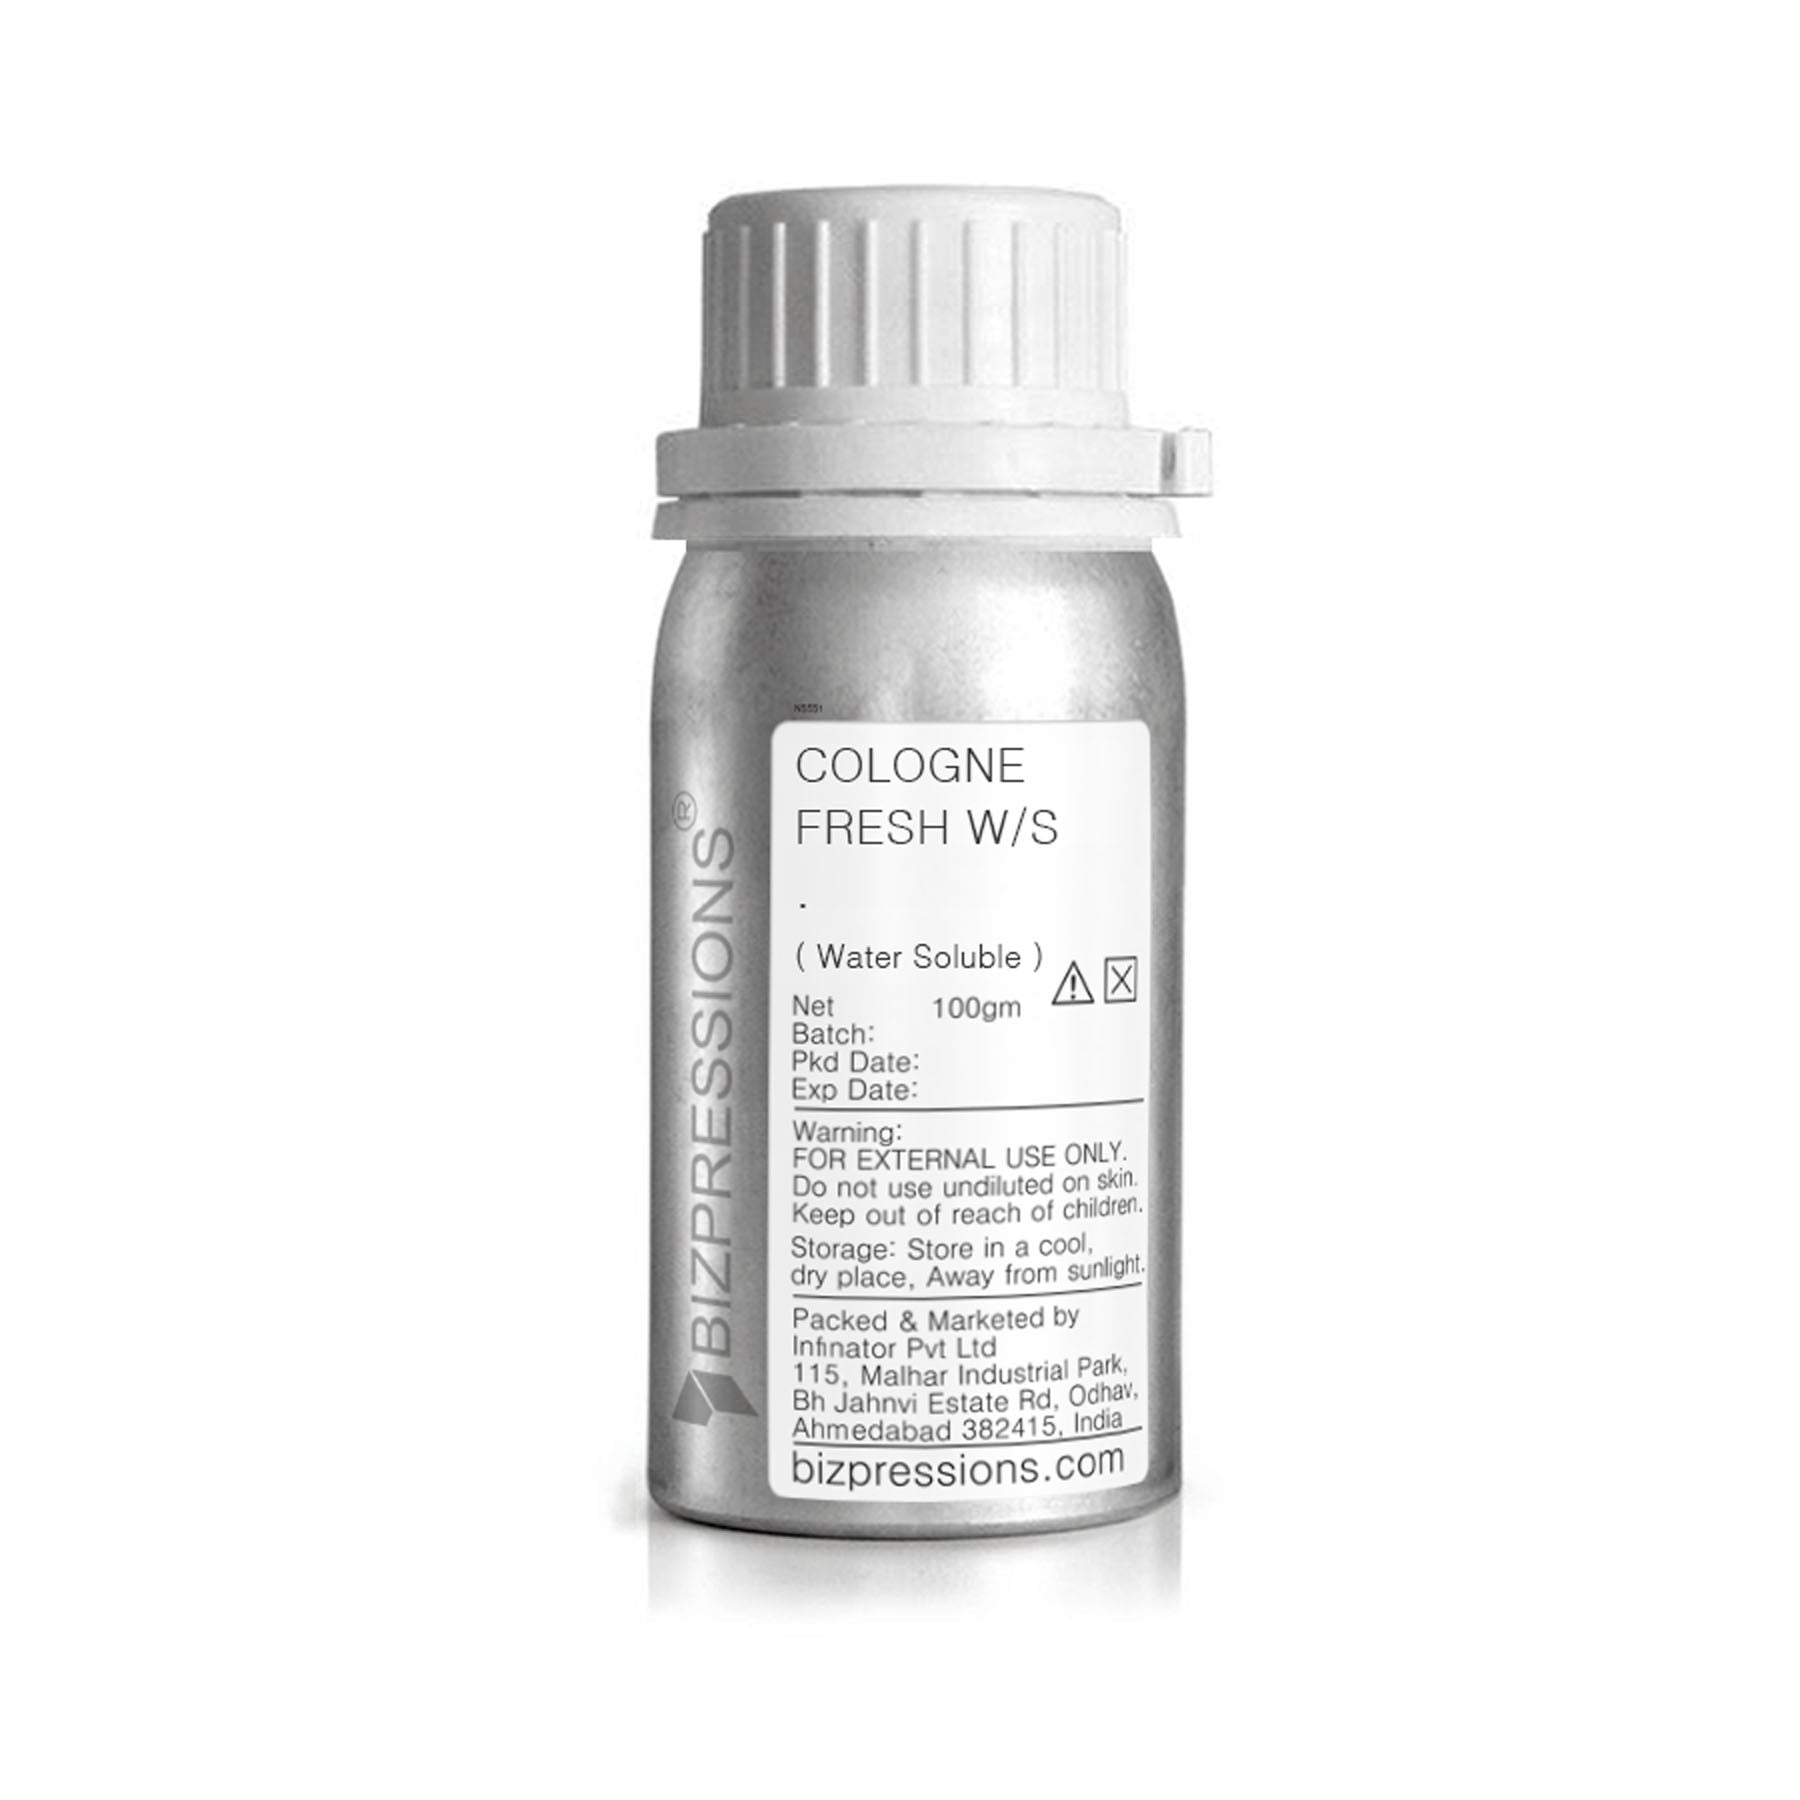 COLOGNE FRESH W/S - Fragrance ( Water Soluble ) - 100 gm